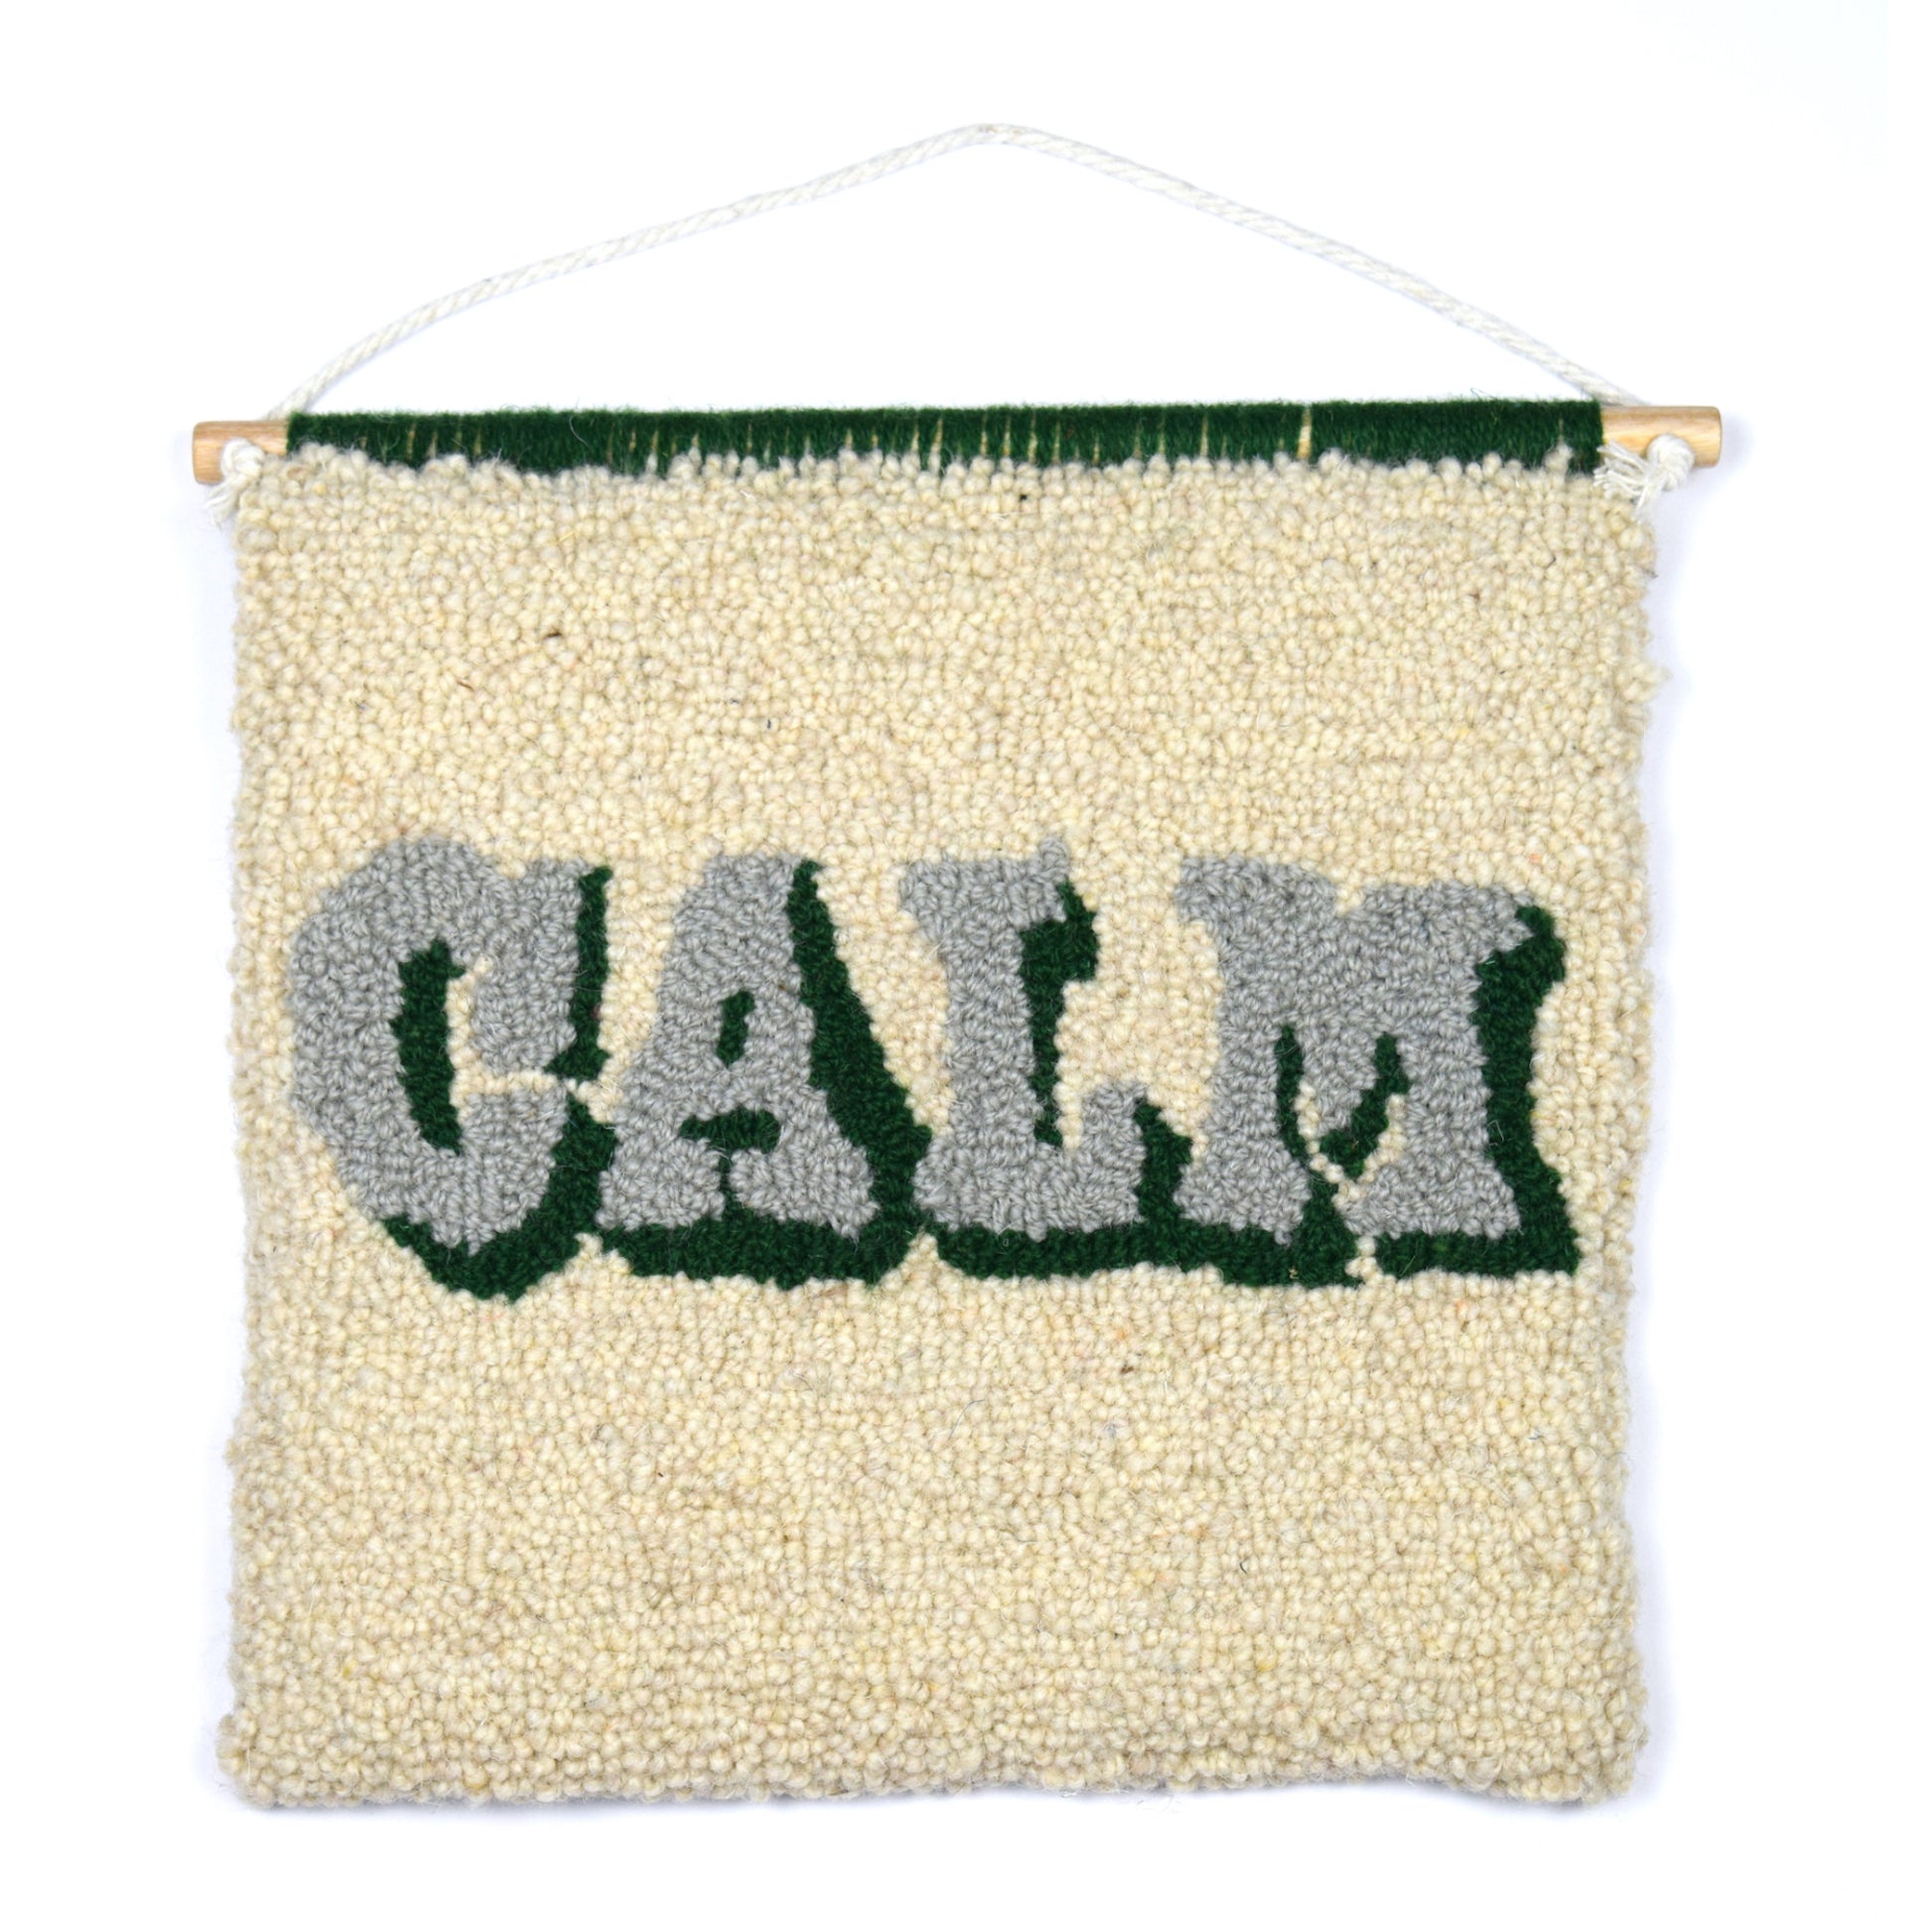 A vintage style typography Wall Hanging with the word CALM soft cream, khaki and green in a loop pile tuft using reclaimed yarn. 